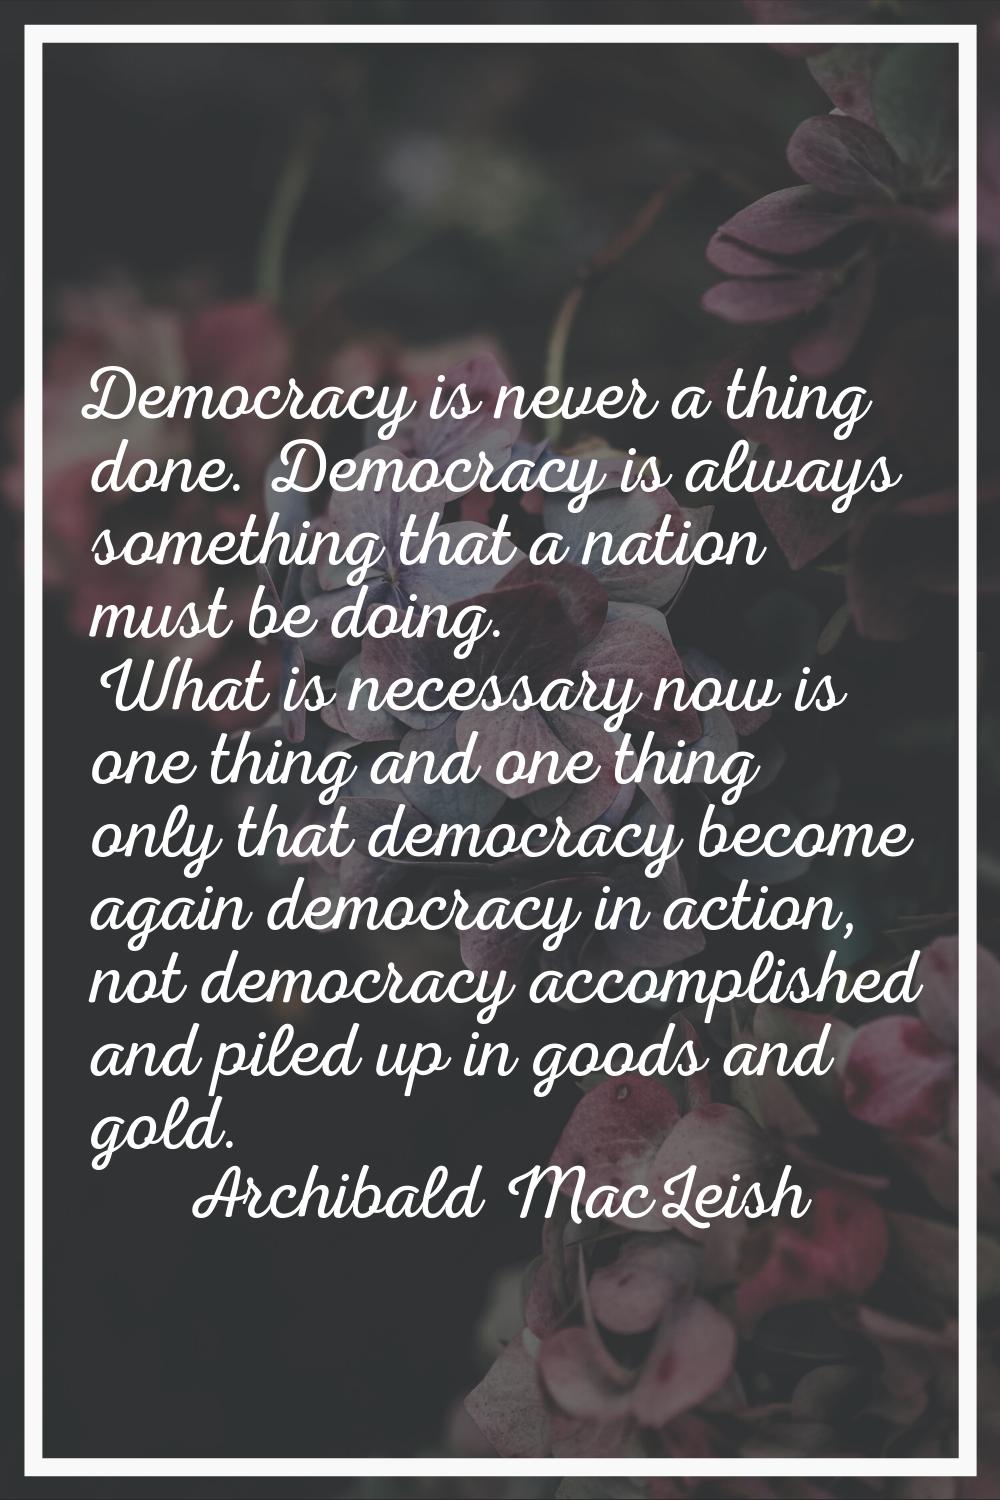 Democracy is never a thing done. Democracy is always something that a nation must be doing. What is